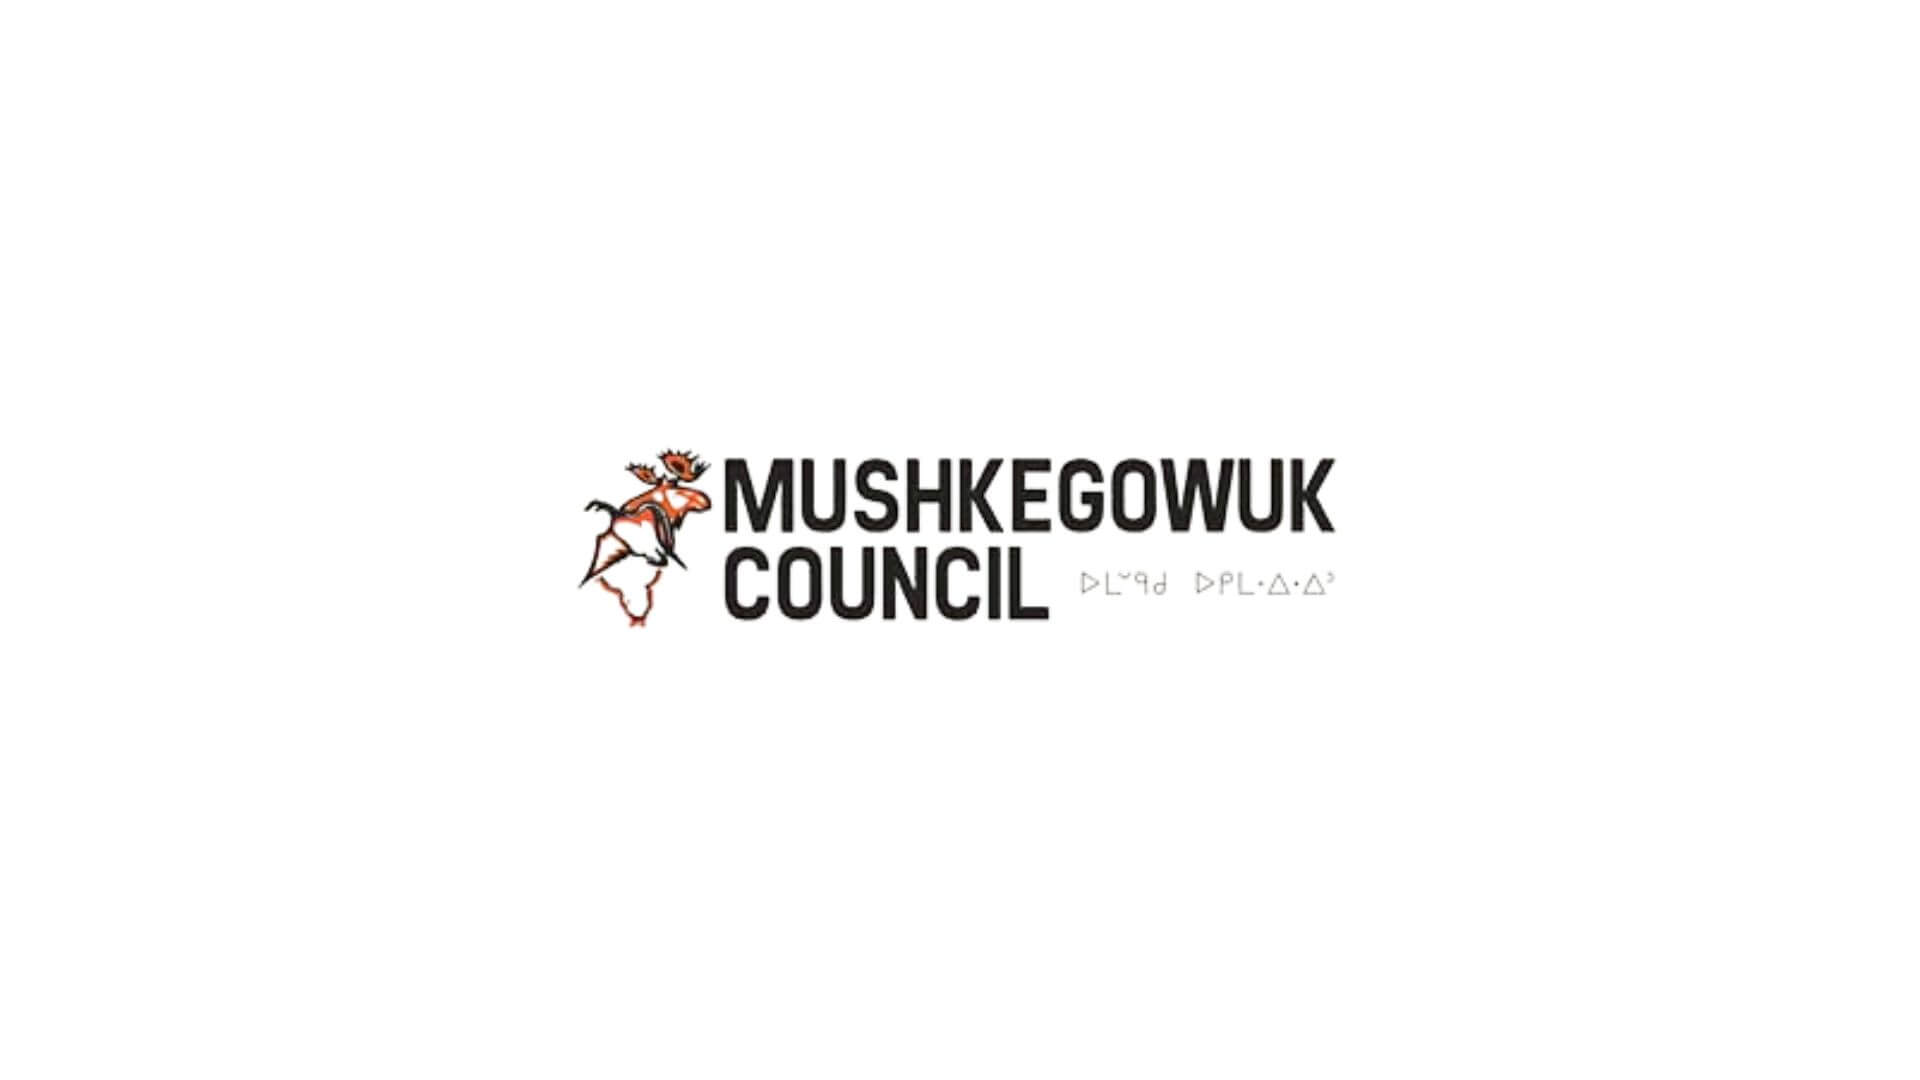 Timmins Care Logo of the mushkegowuk council featuring stylized text and an illustration of a person with raised arms beside the text, commissioned by the Cochrane District Social Services Administration Board. Cochrane District Social Services Administration Board